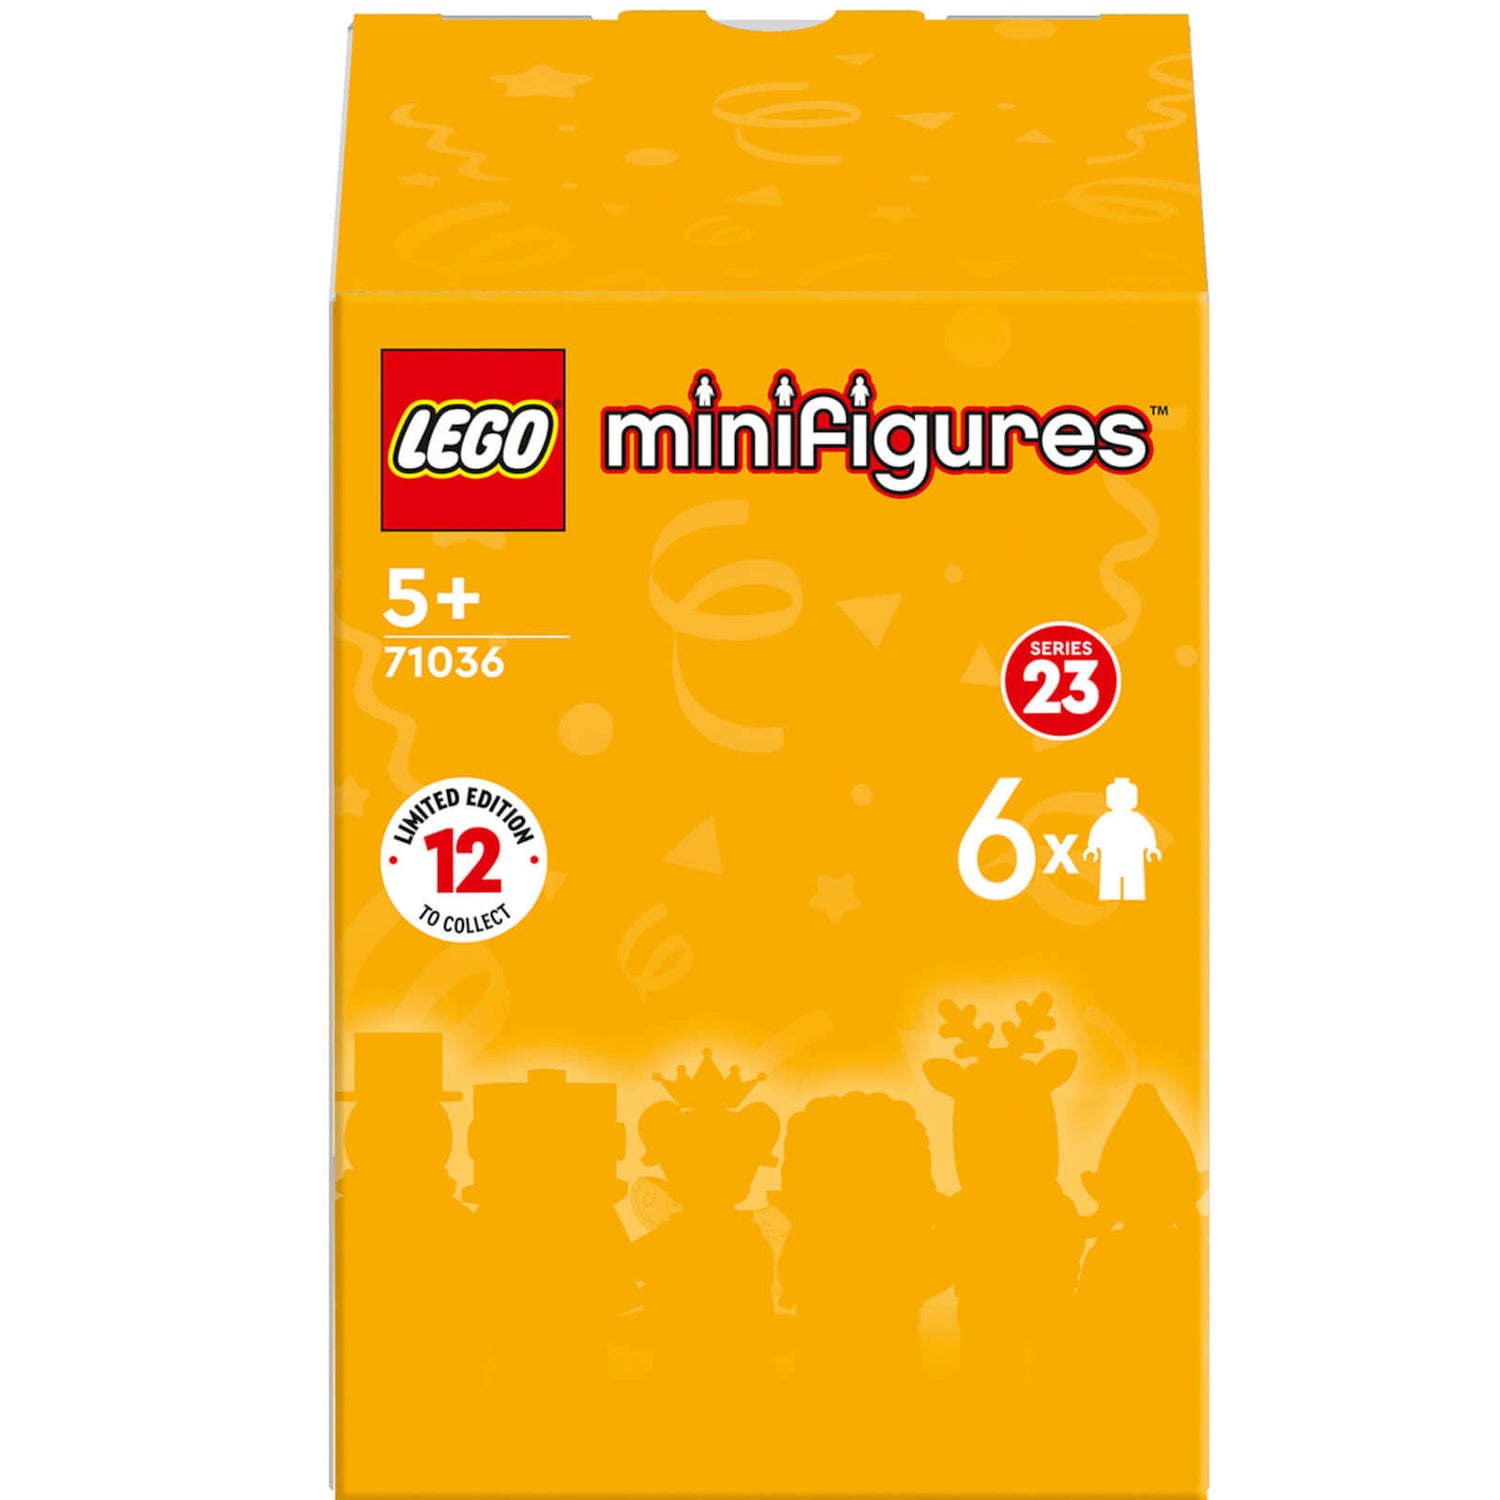 LEGO Collectible Minifigures Series 23 6 Pack (71036)